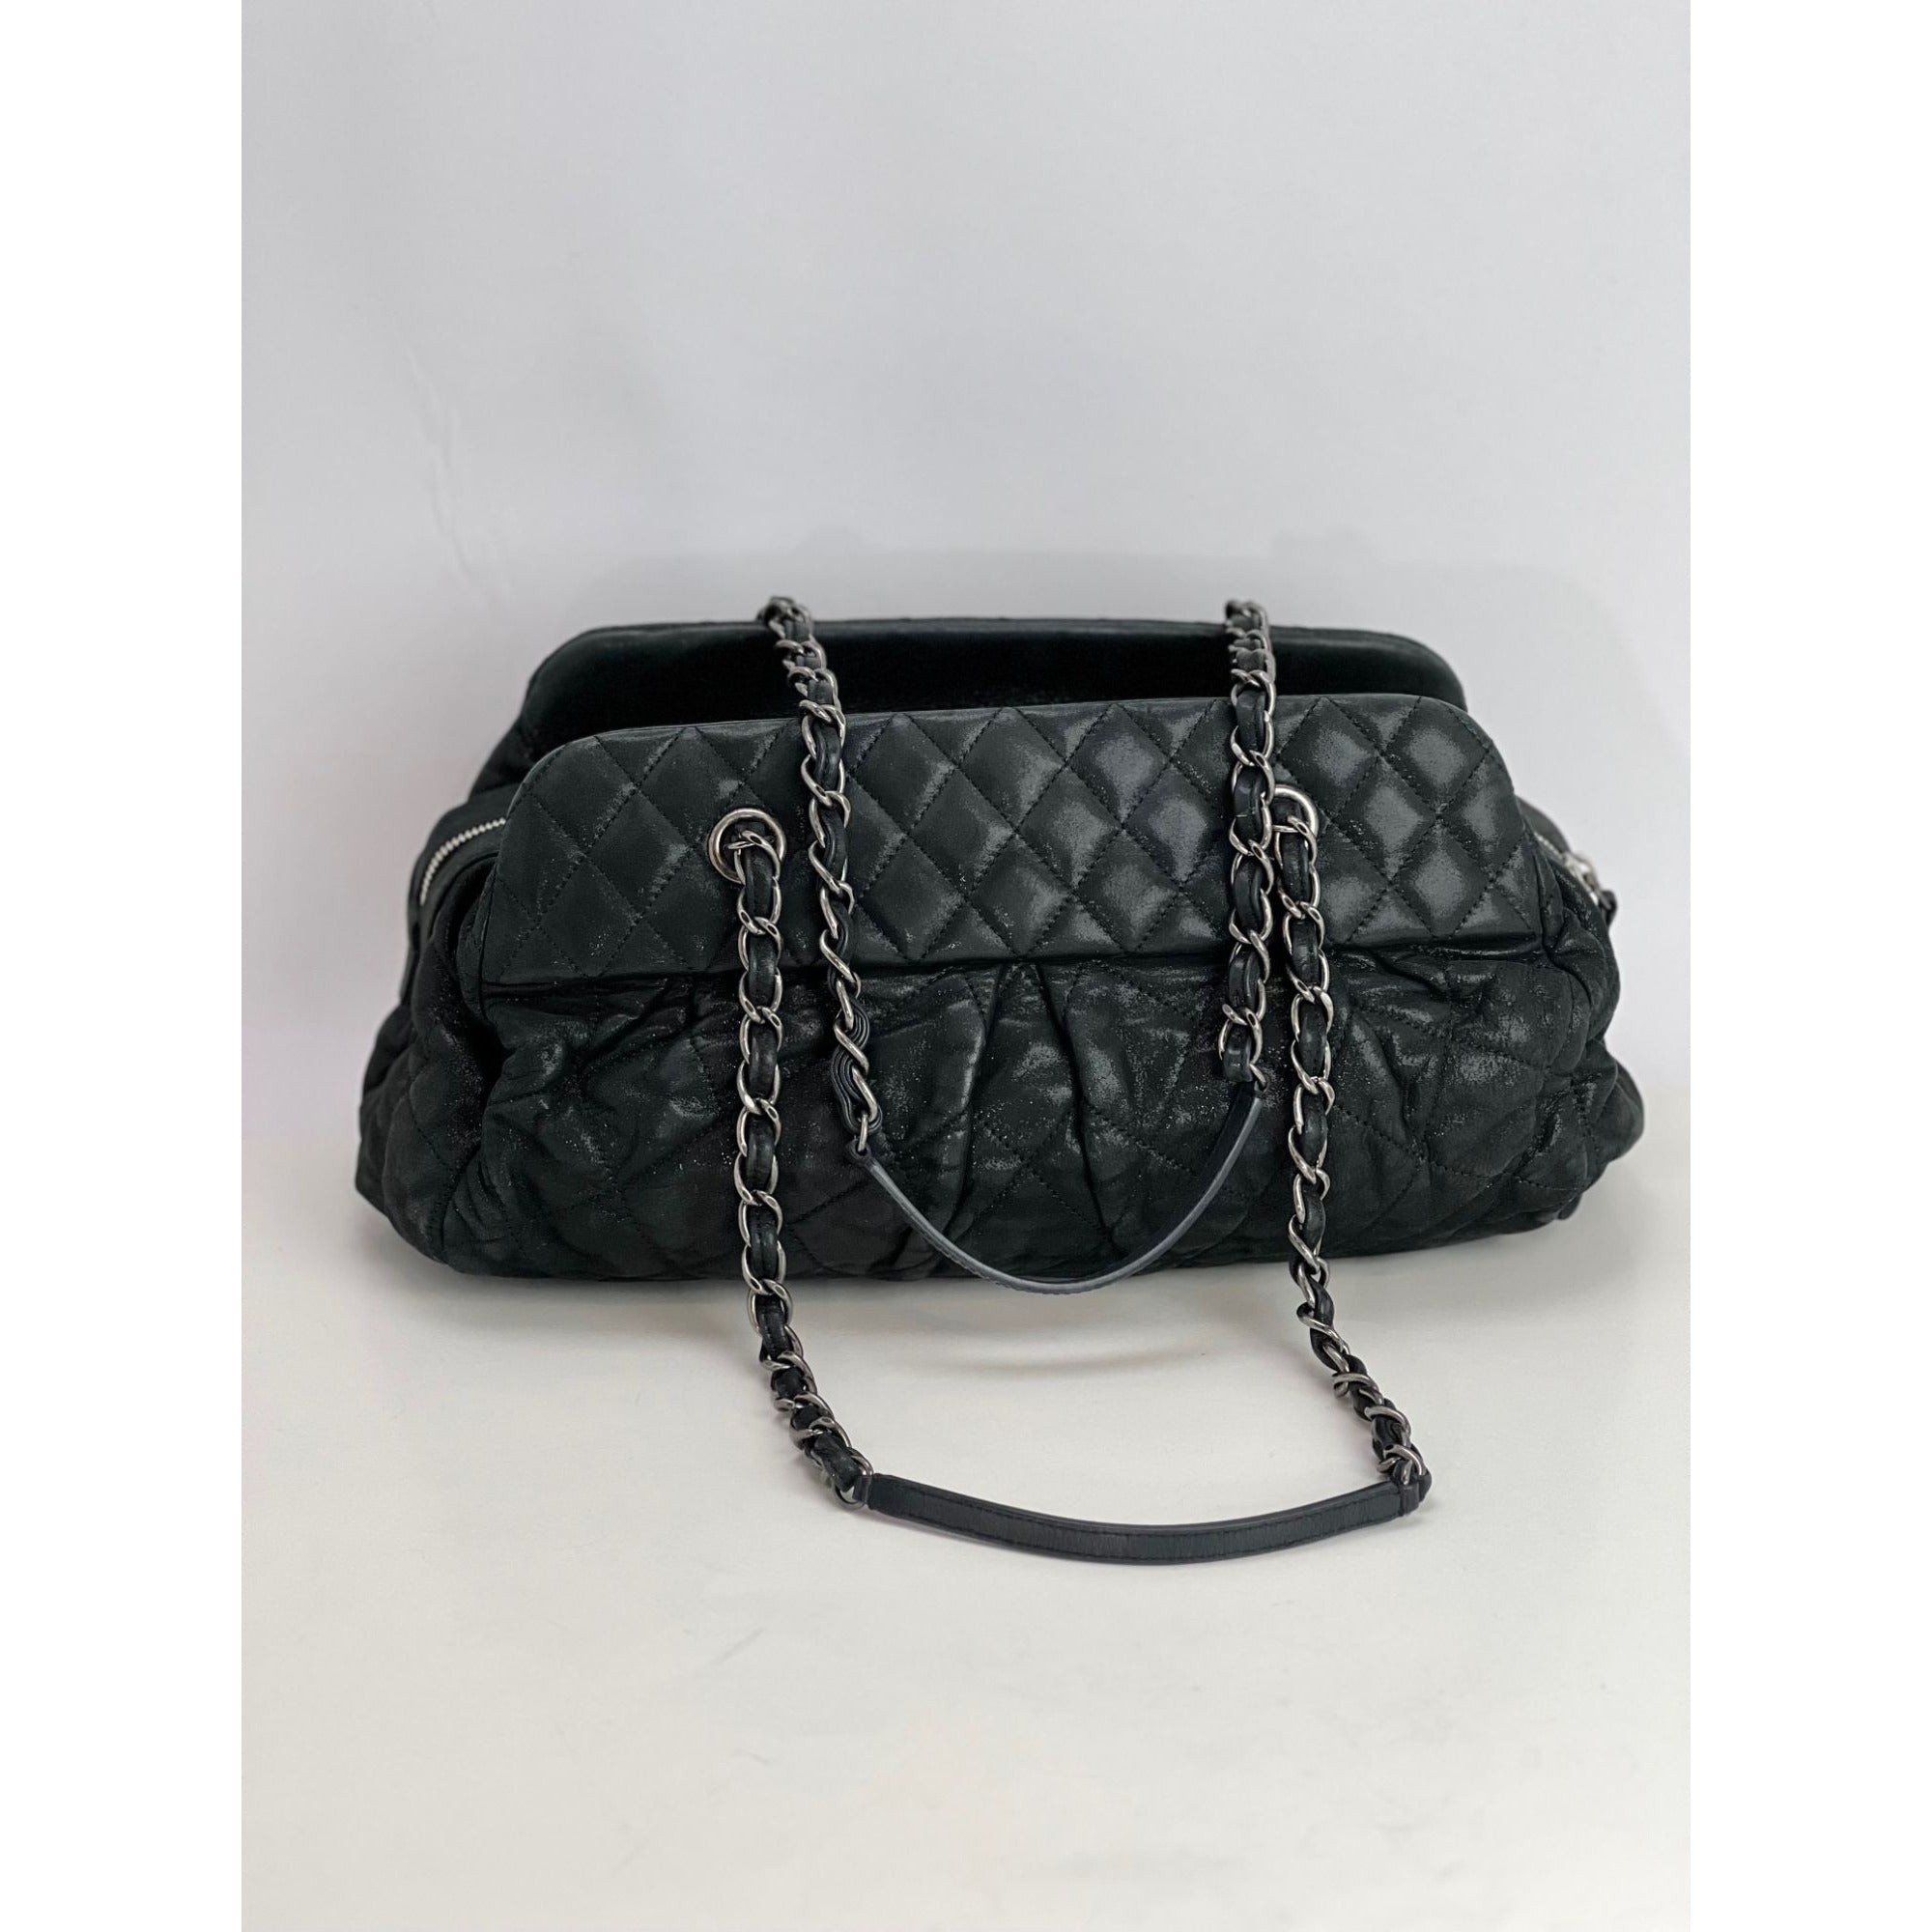 CHANEL Chanel Iridescent Calfskin Quilted CC Tote Black